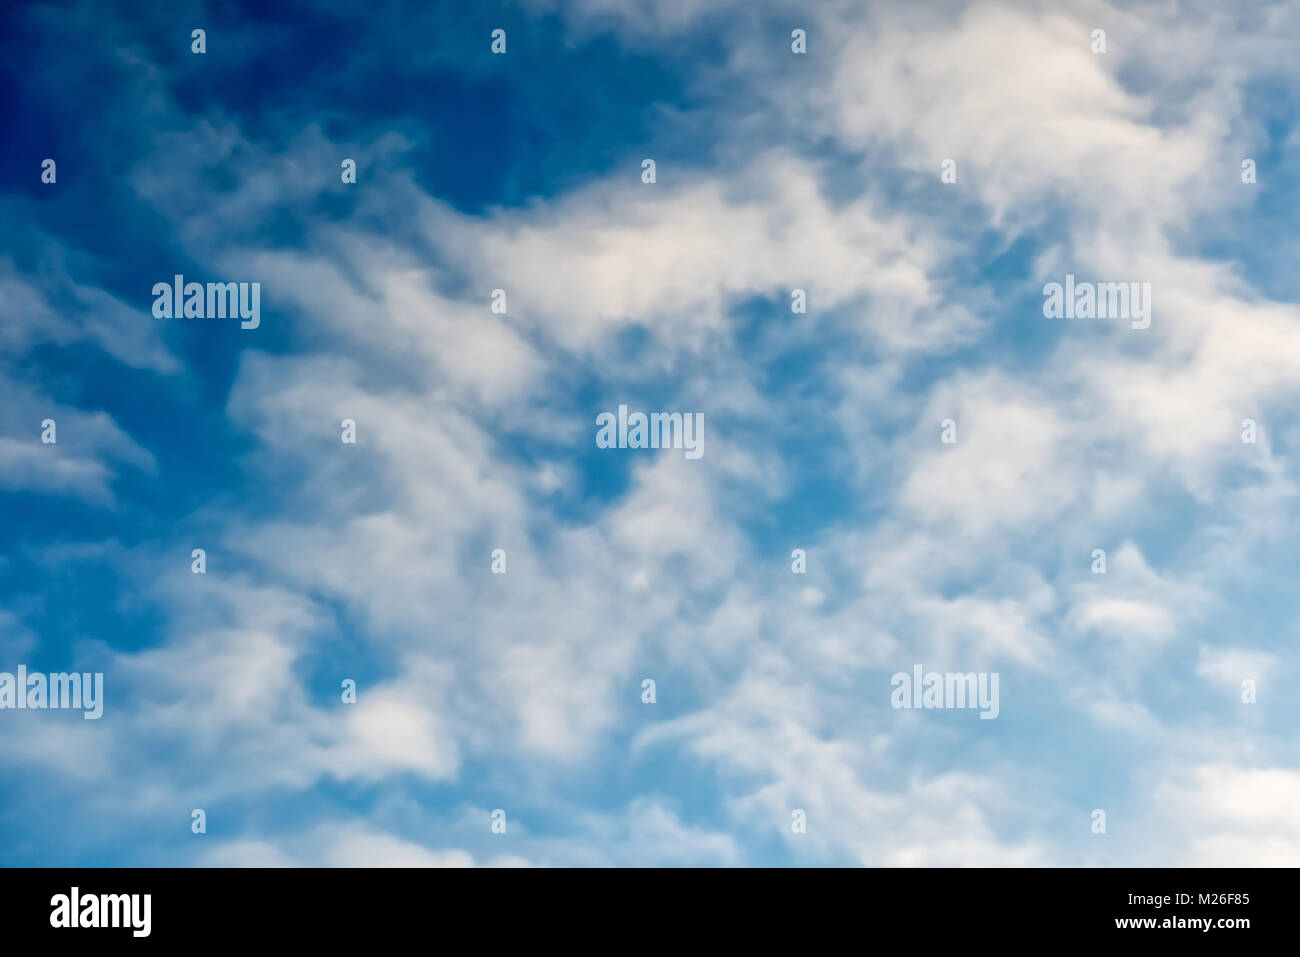 Beautiful natural bright blue sky background with white fluffy clouds. Concept of peacefull sunny day. Stock Photo